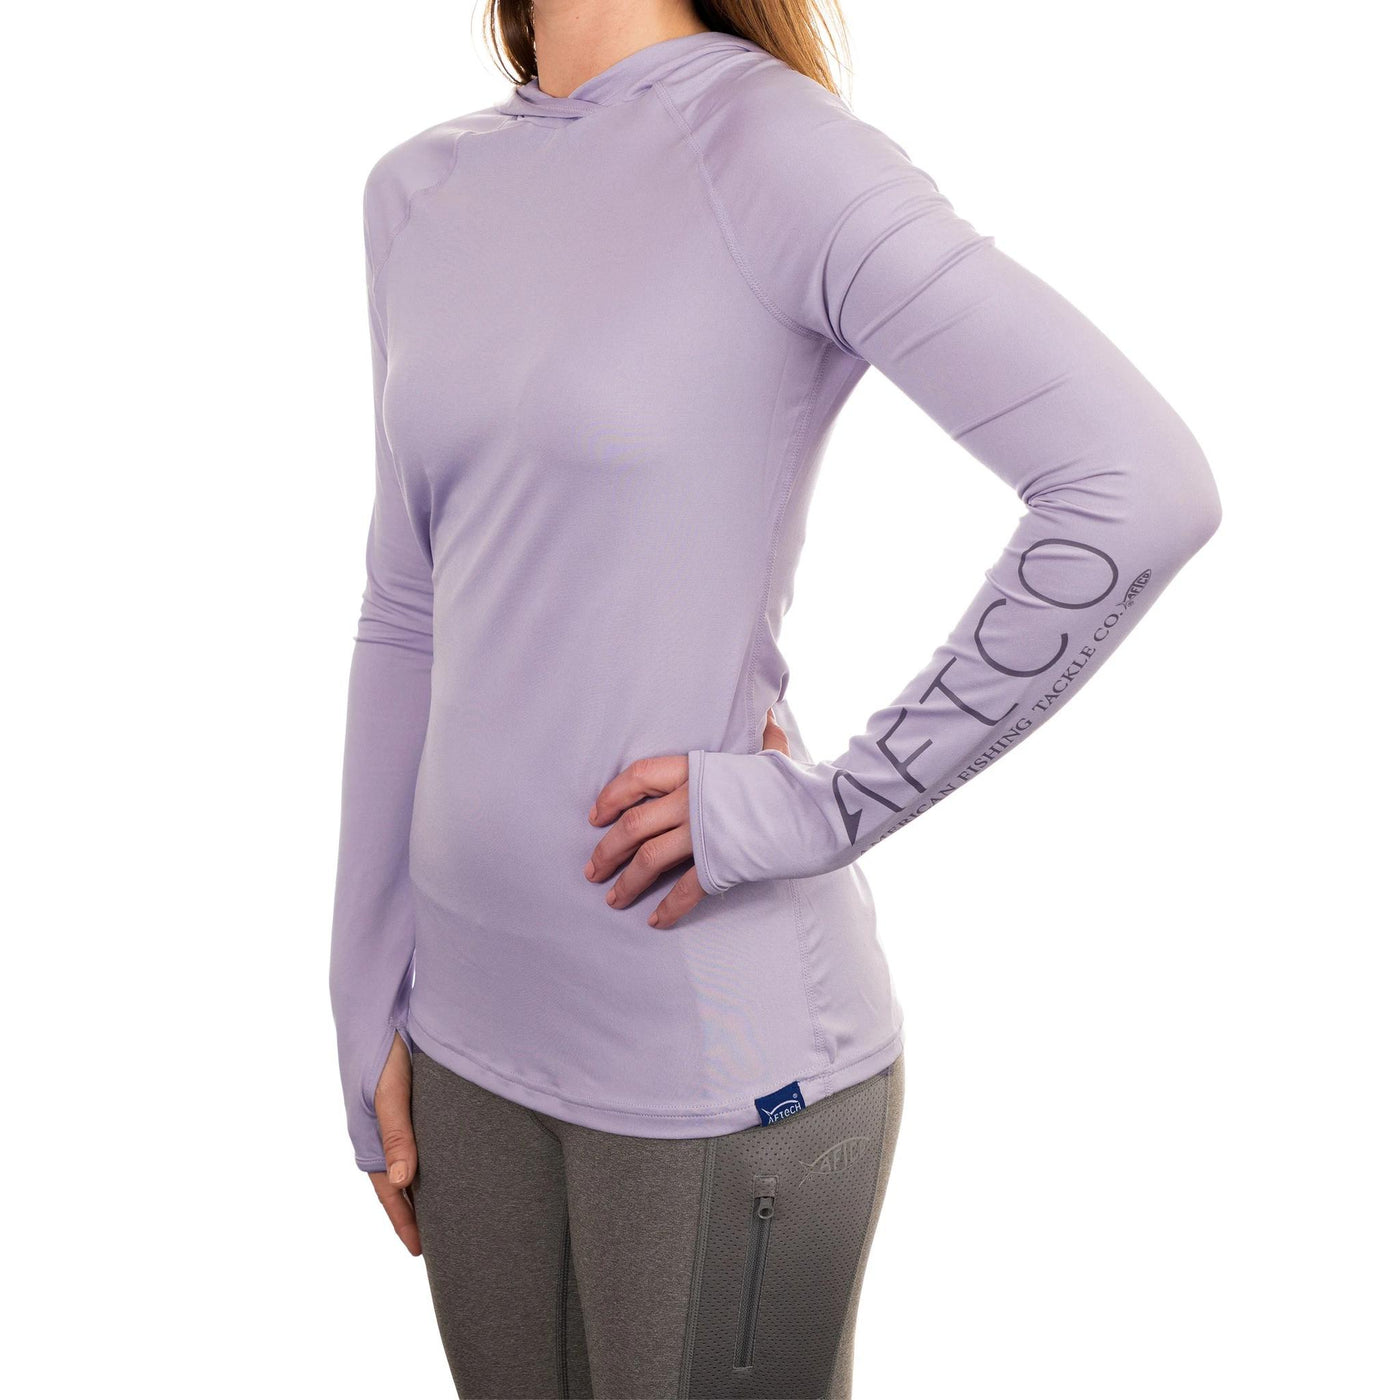 Aftco Women's Samurai Sun Protection Hoodie-WOMENS CLOTHING-Kevin's Fine Outdoor Gear & Apparel